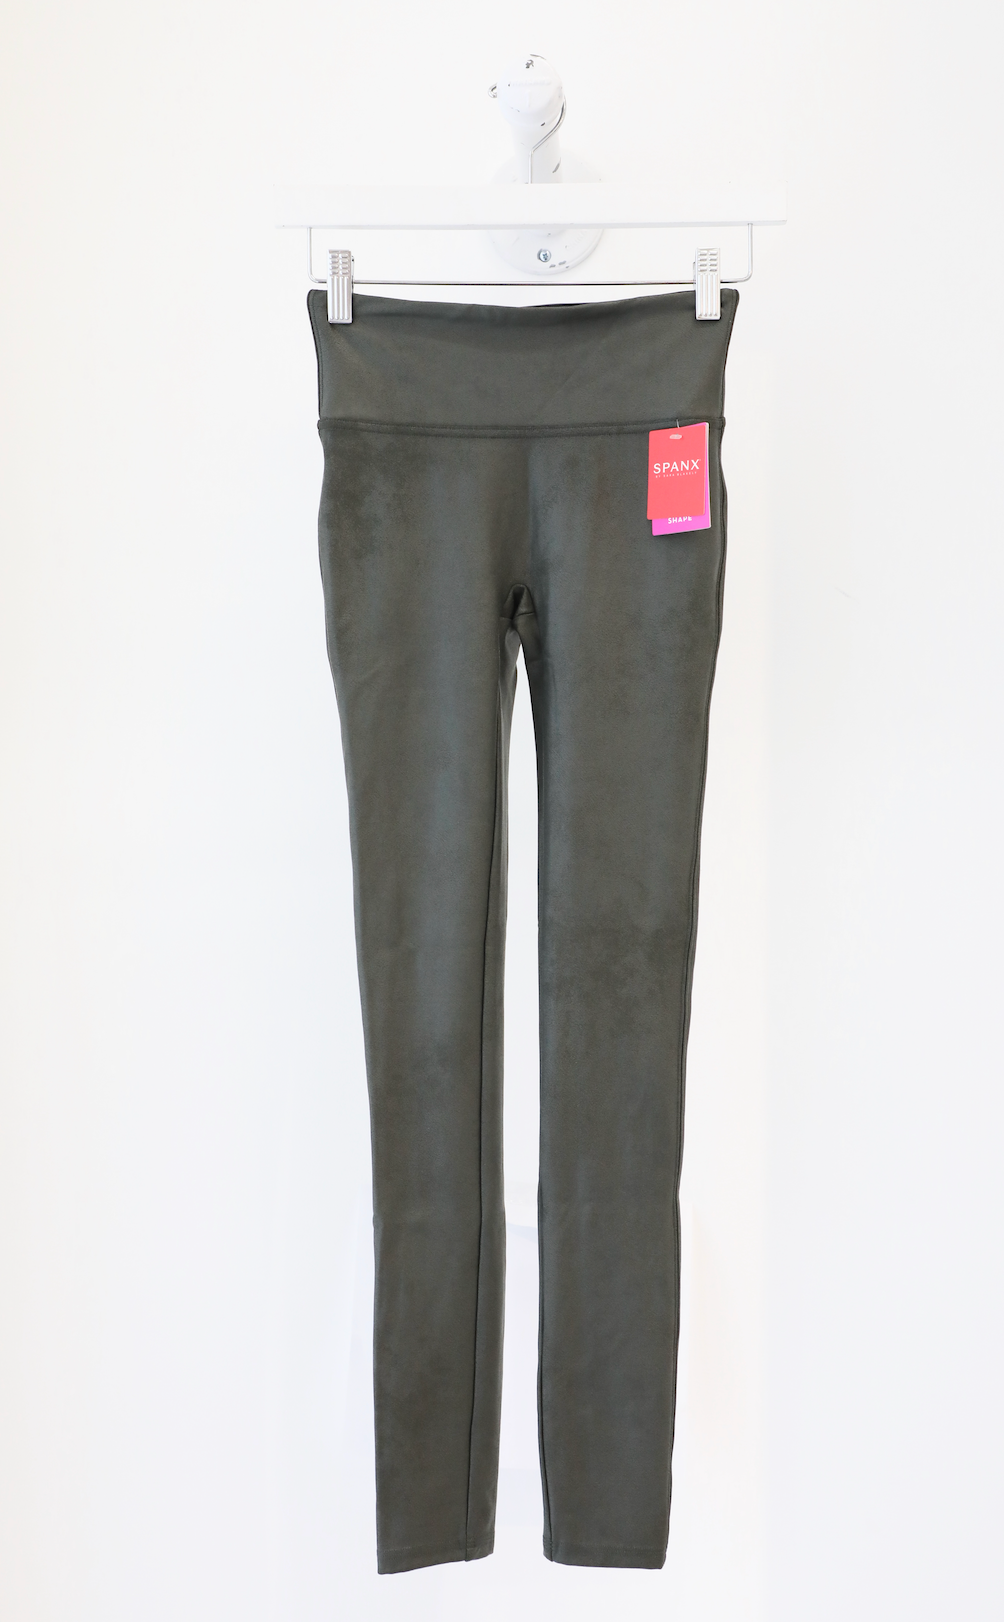 Spanx - Faux Leather Leggings in Rich Olive